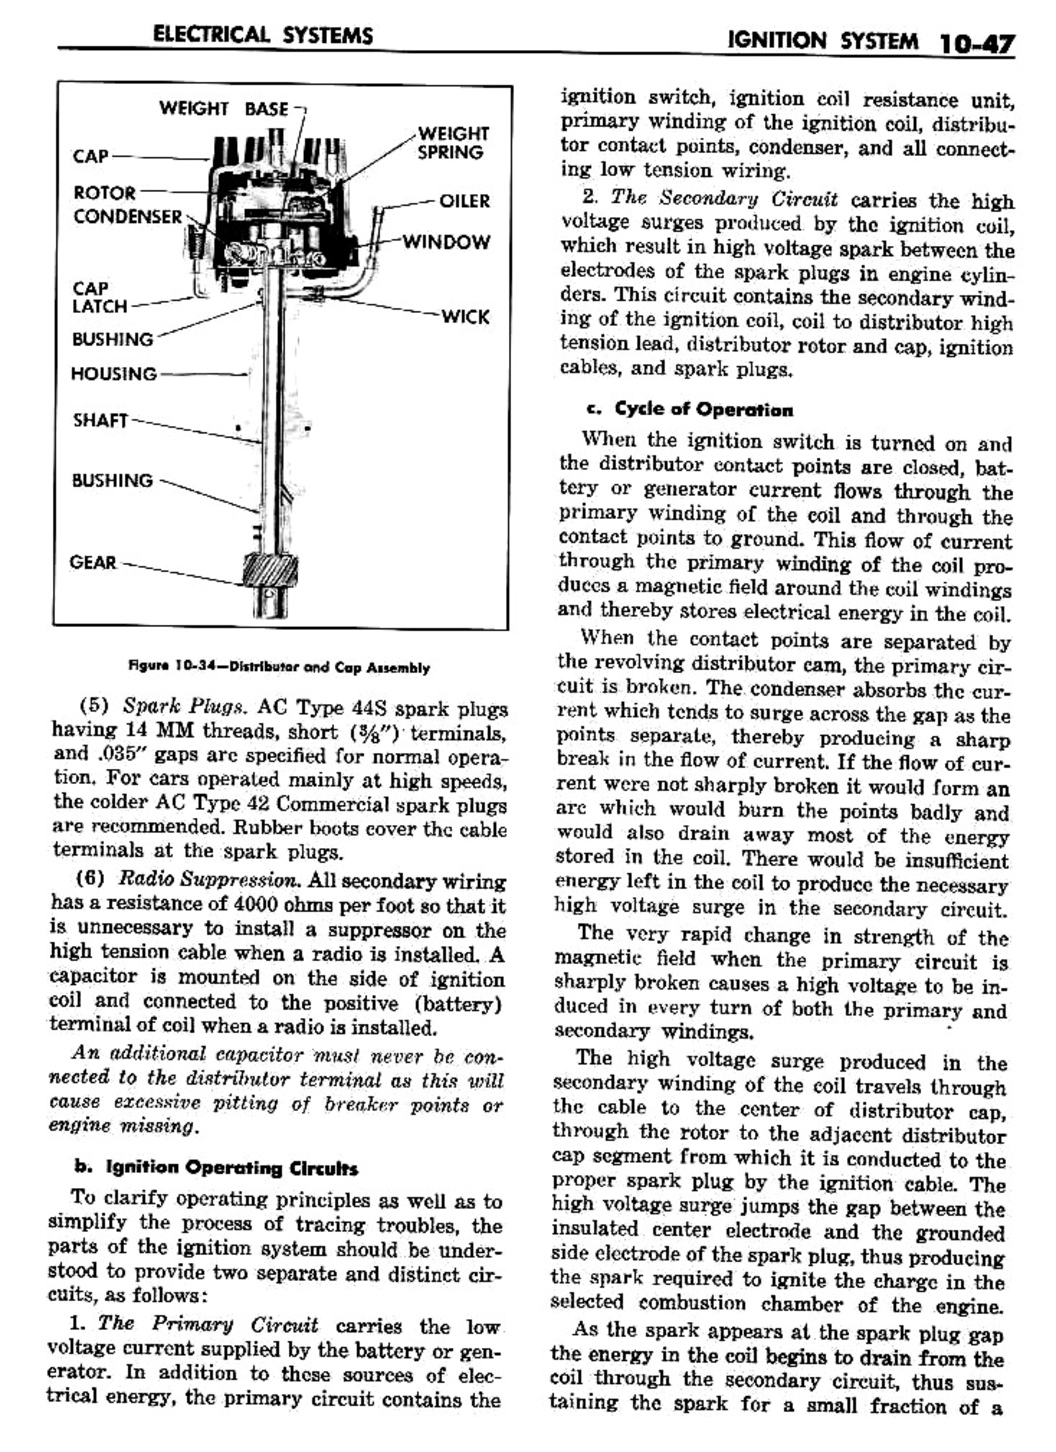 n_11 1960 Buick Shop Manual - Electrical Systems-047-047.jpg